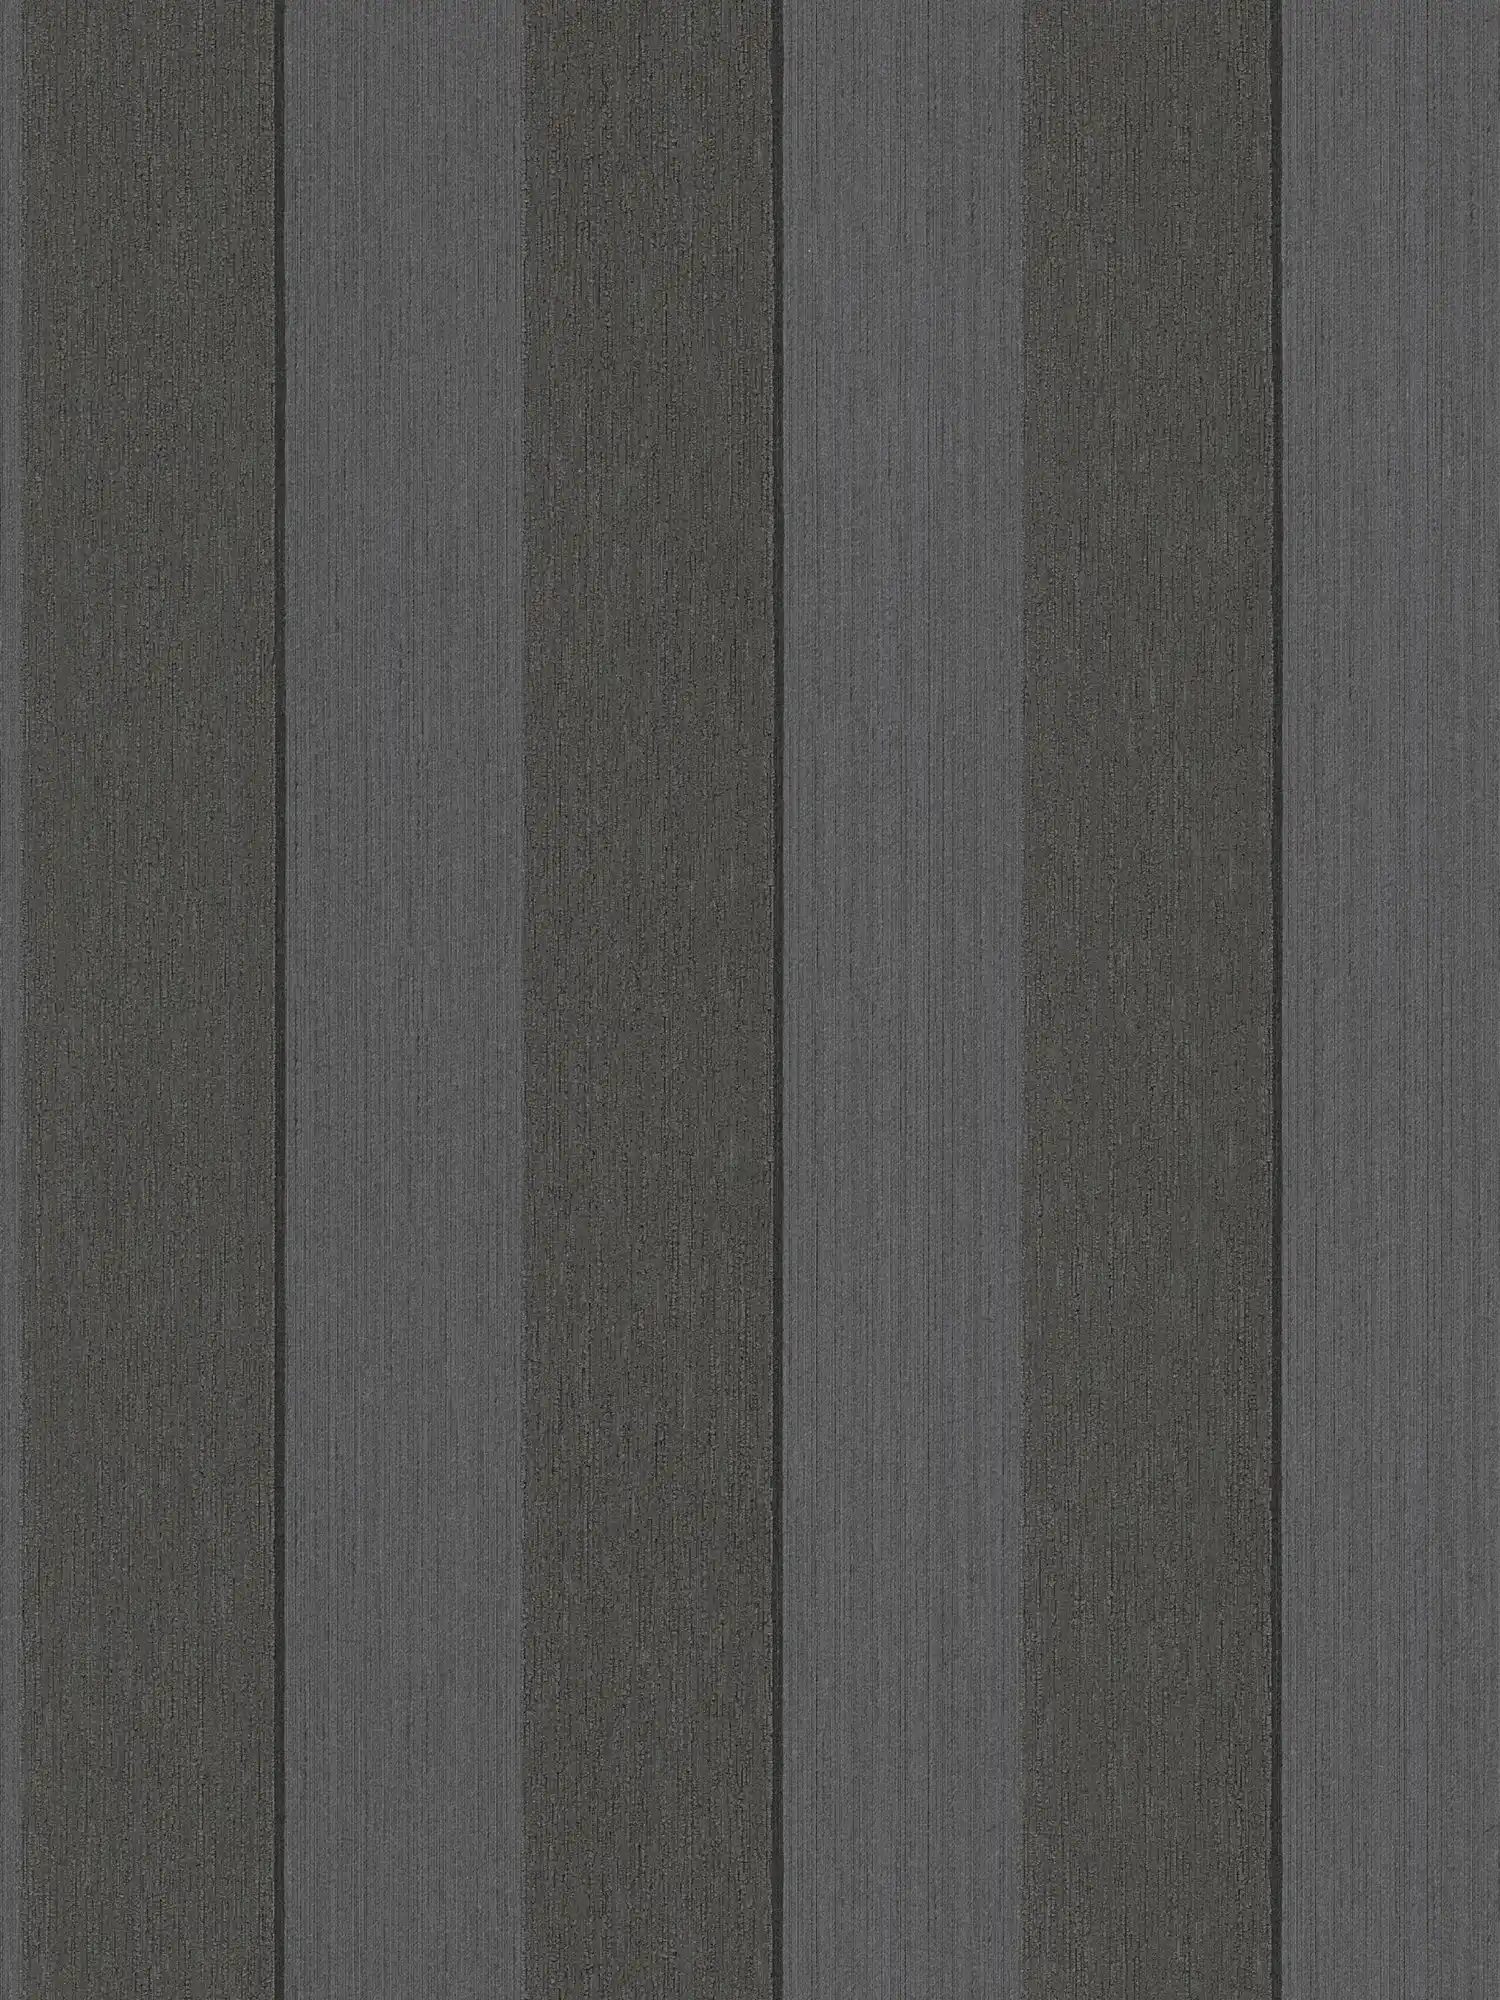 Dark non-woven wallpaper striped with textured pattern - brown
